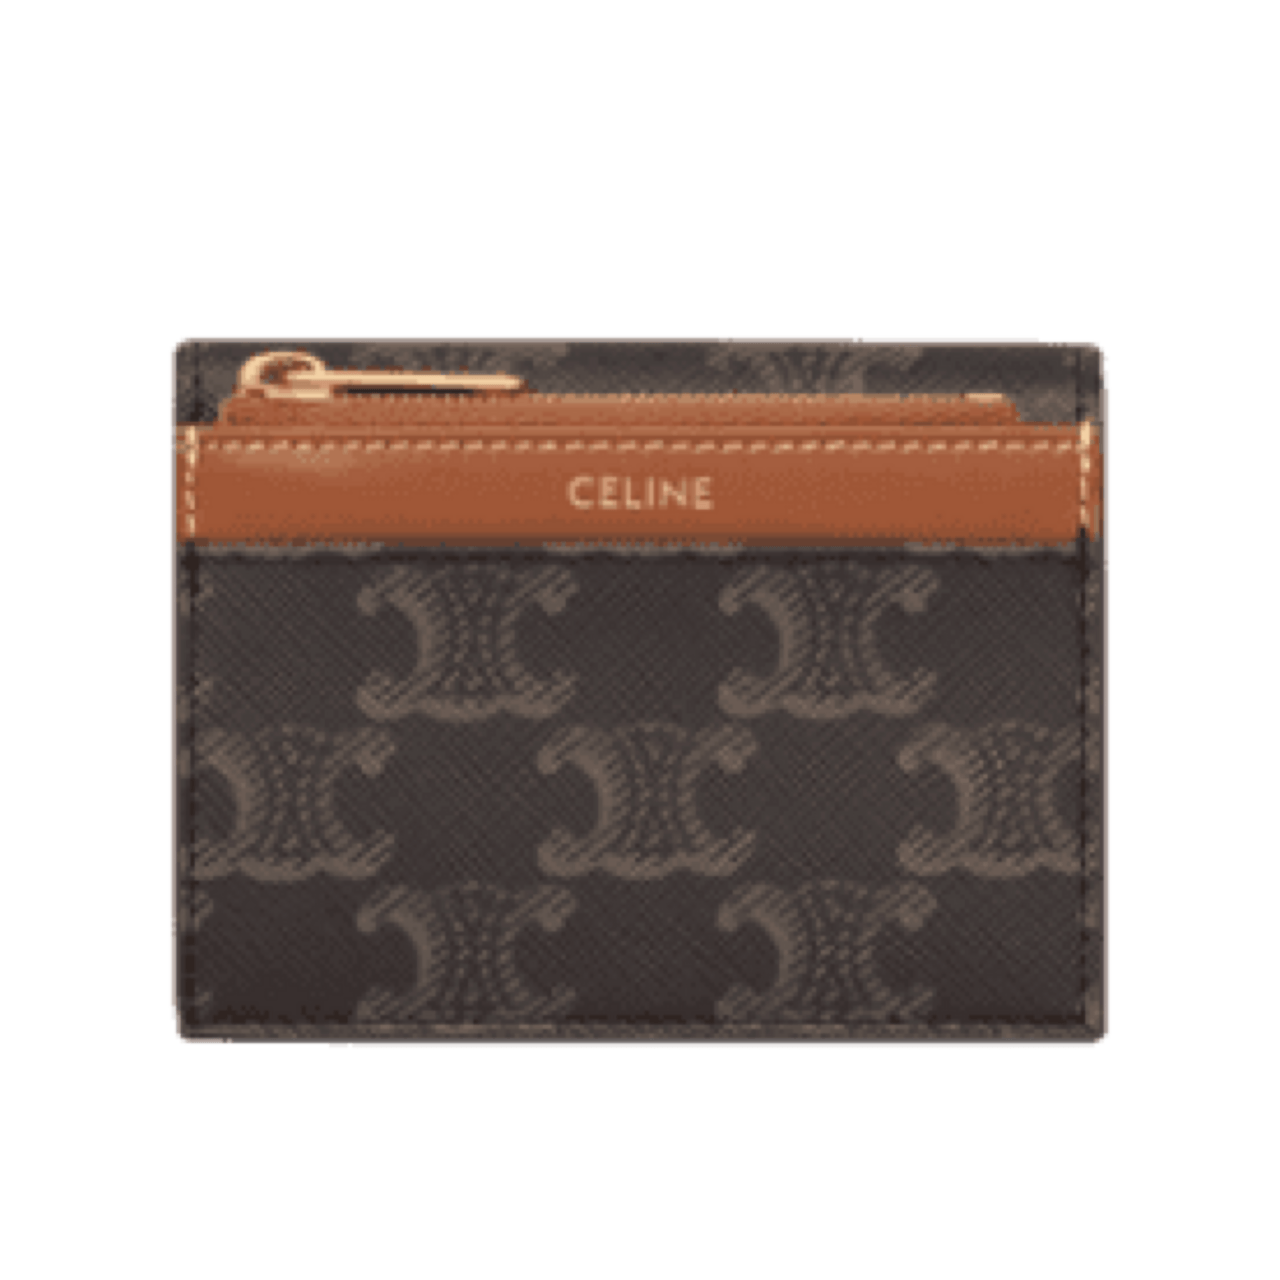 Celine Triomphe Compact Wallet with Coin